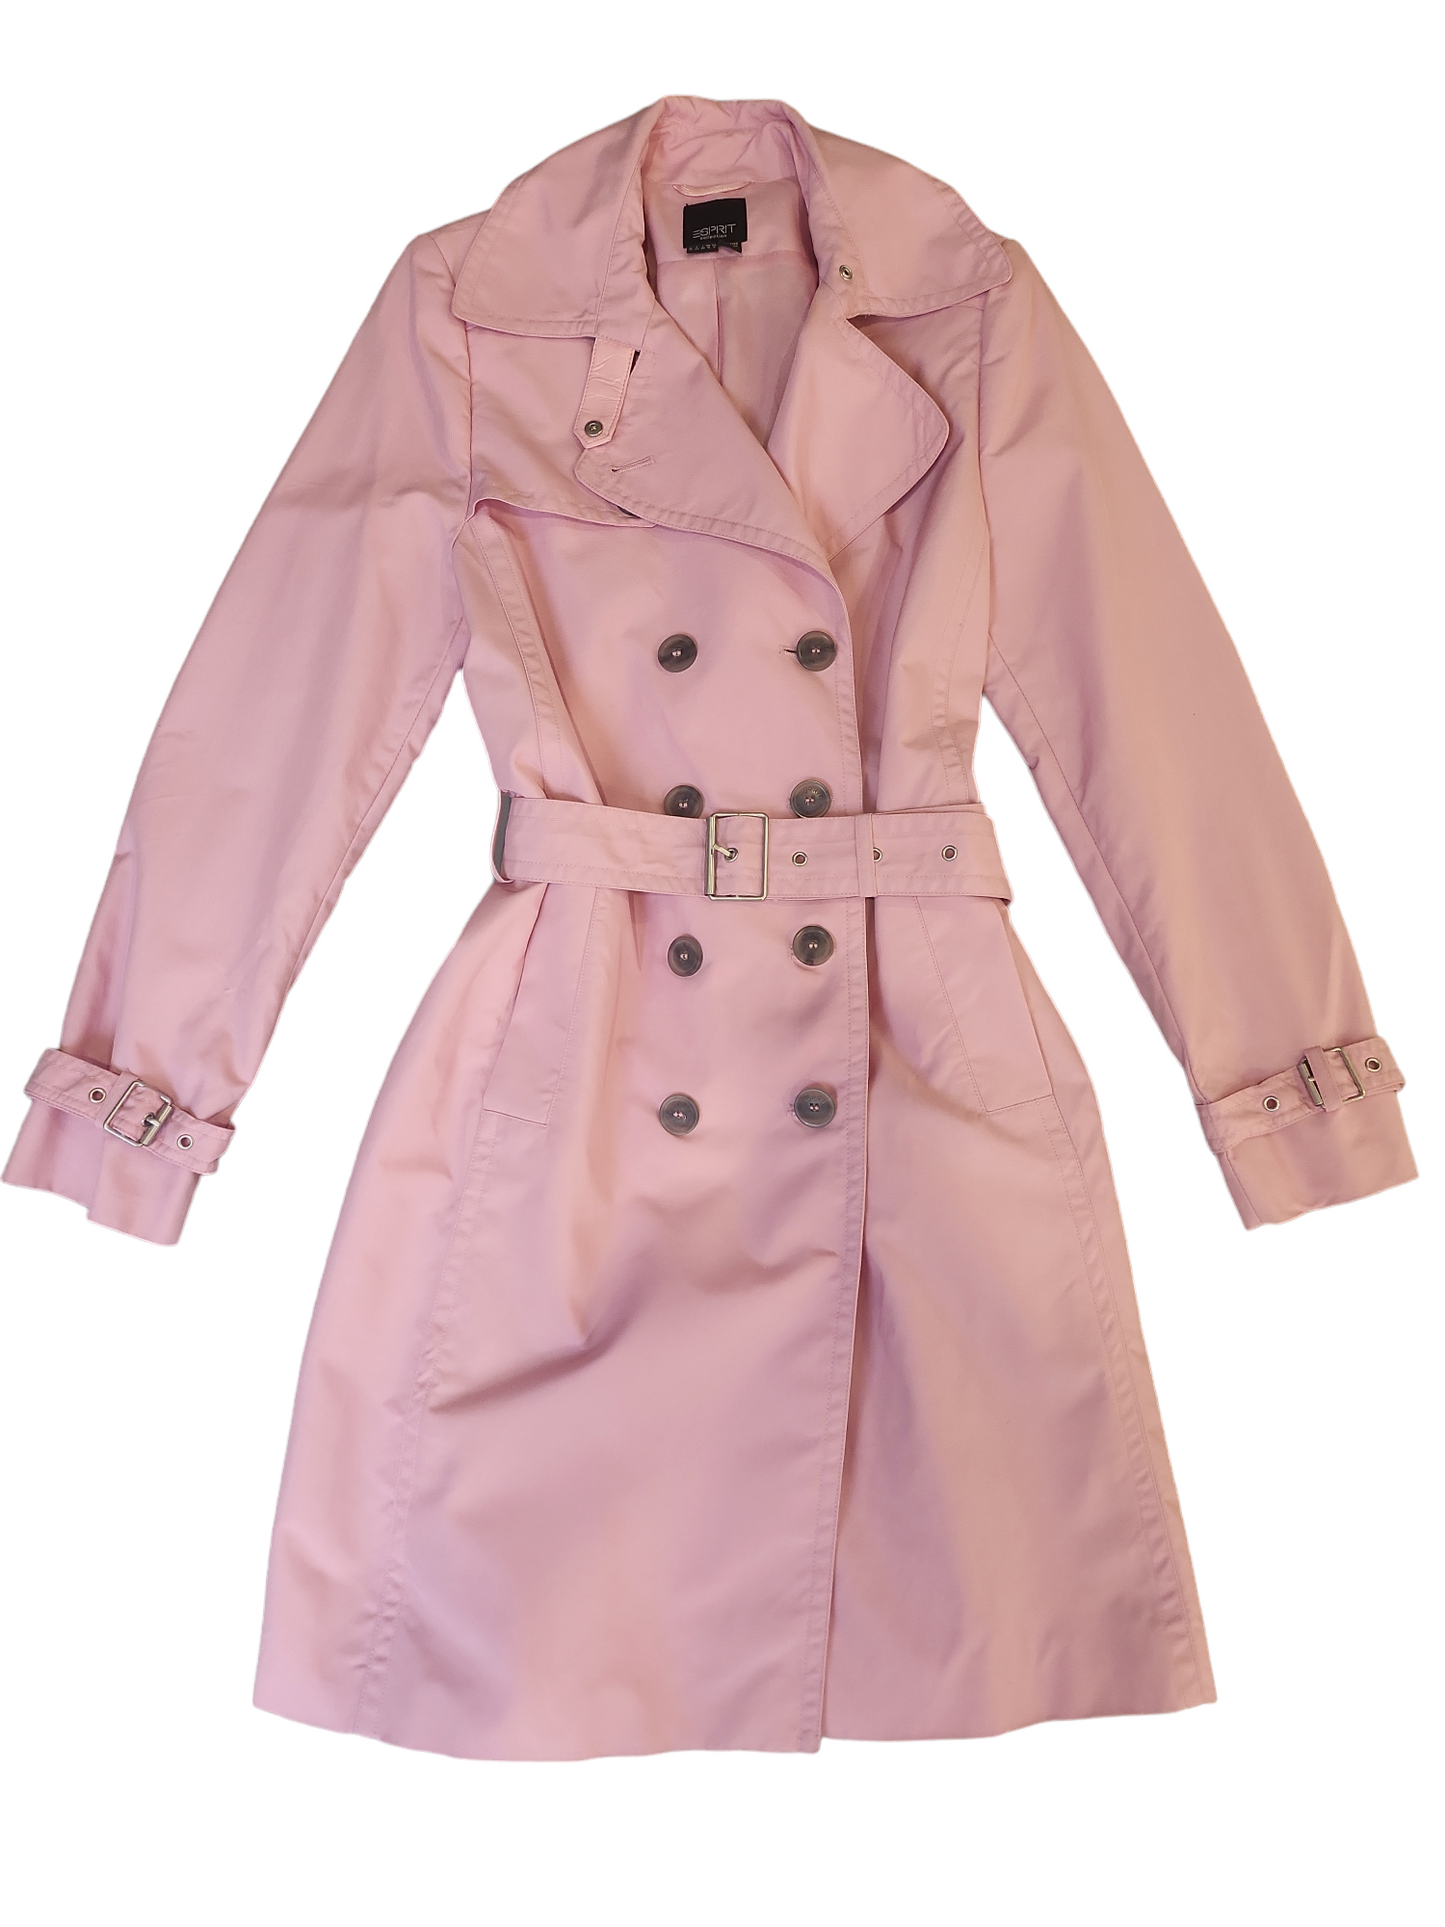 Esprit Pink Trench Coat Size 6